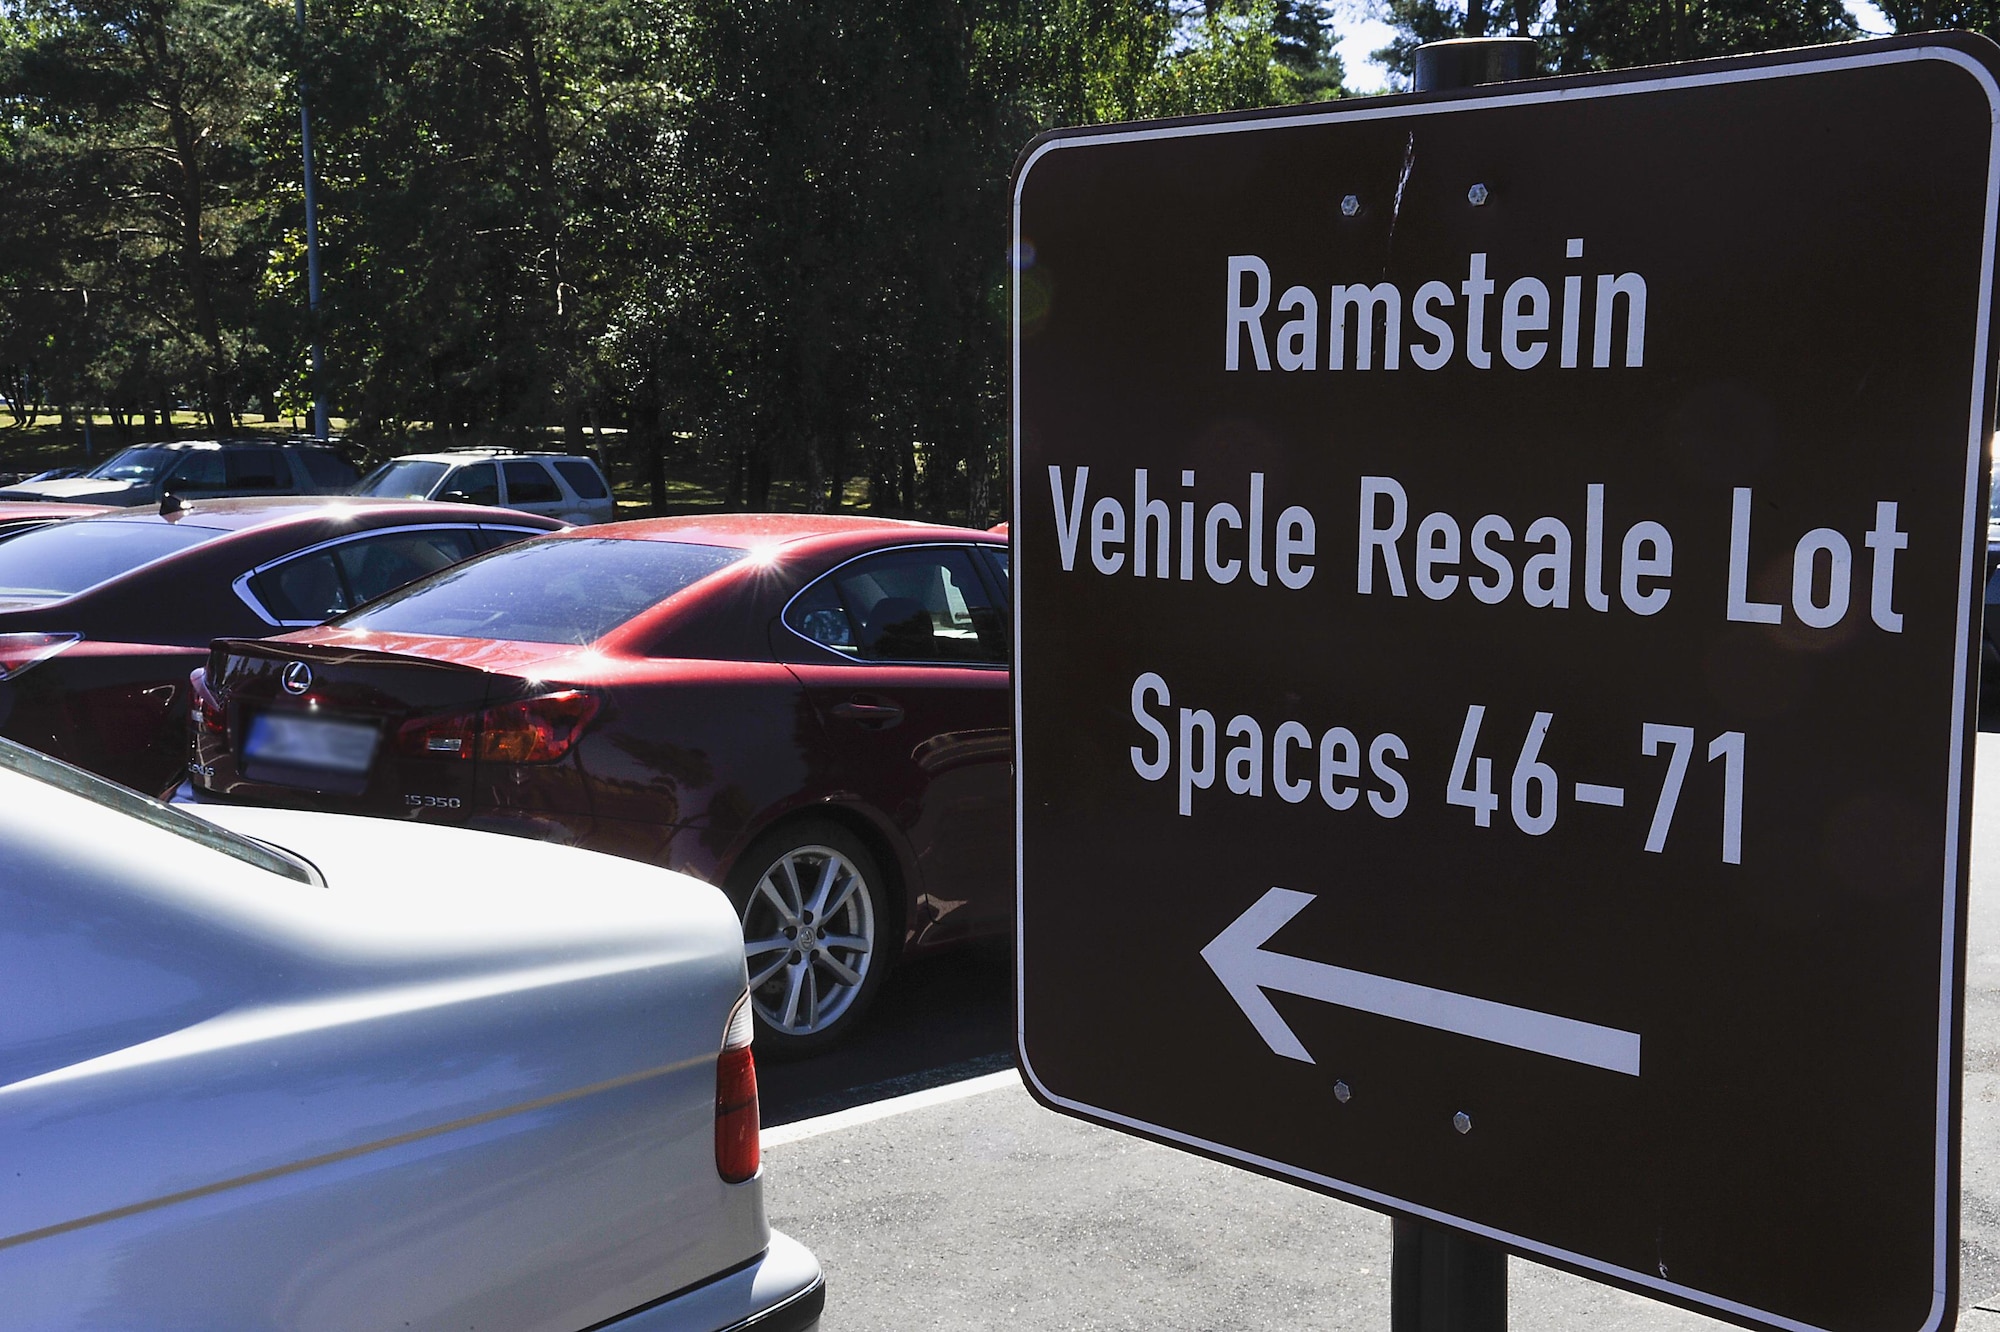 A sign points to parking spots at the 86th Force Support Squadron Outdoor Recreation resale lot Aug. 24, 2016, at Ramstein Air Base, Germany. The resale lot is located in the Northside Chapel parking lot, next to the Passenger Terminal long-term parking. (U.S. Air Force photo/Senior Airman Larissa Greatwood)